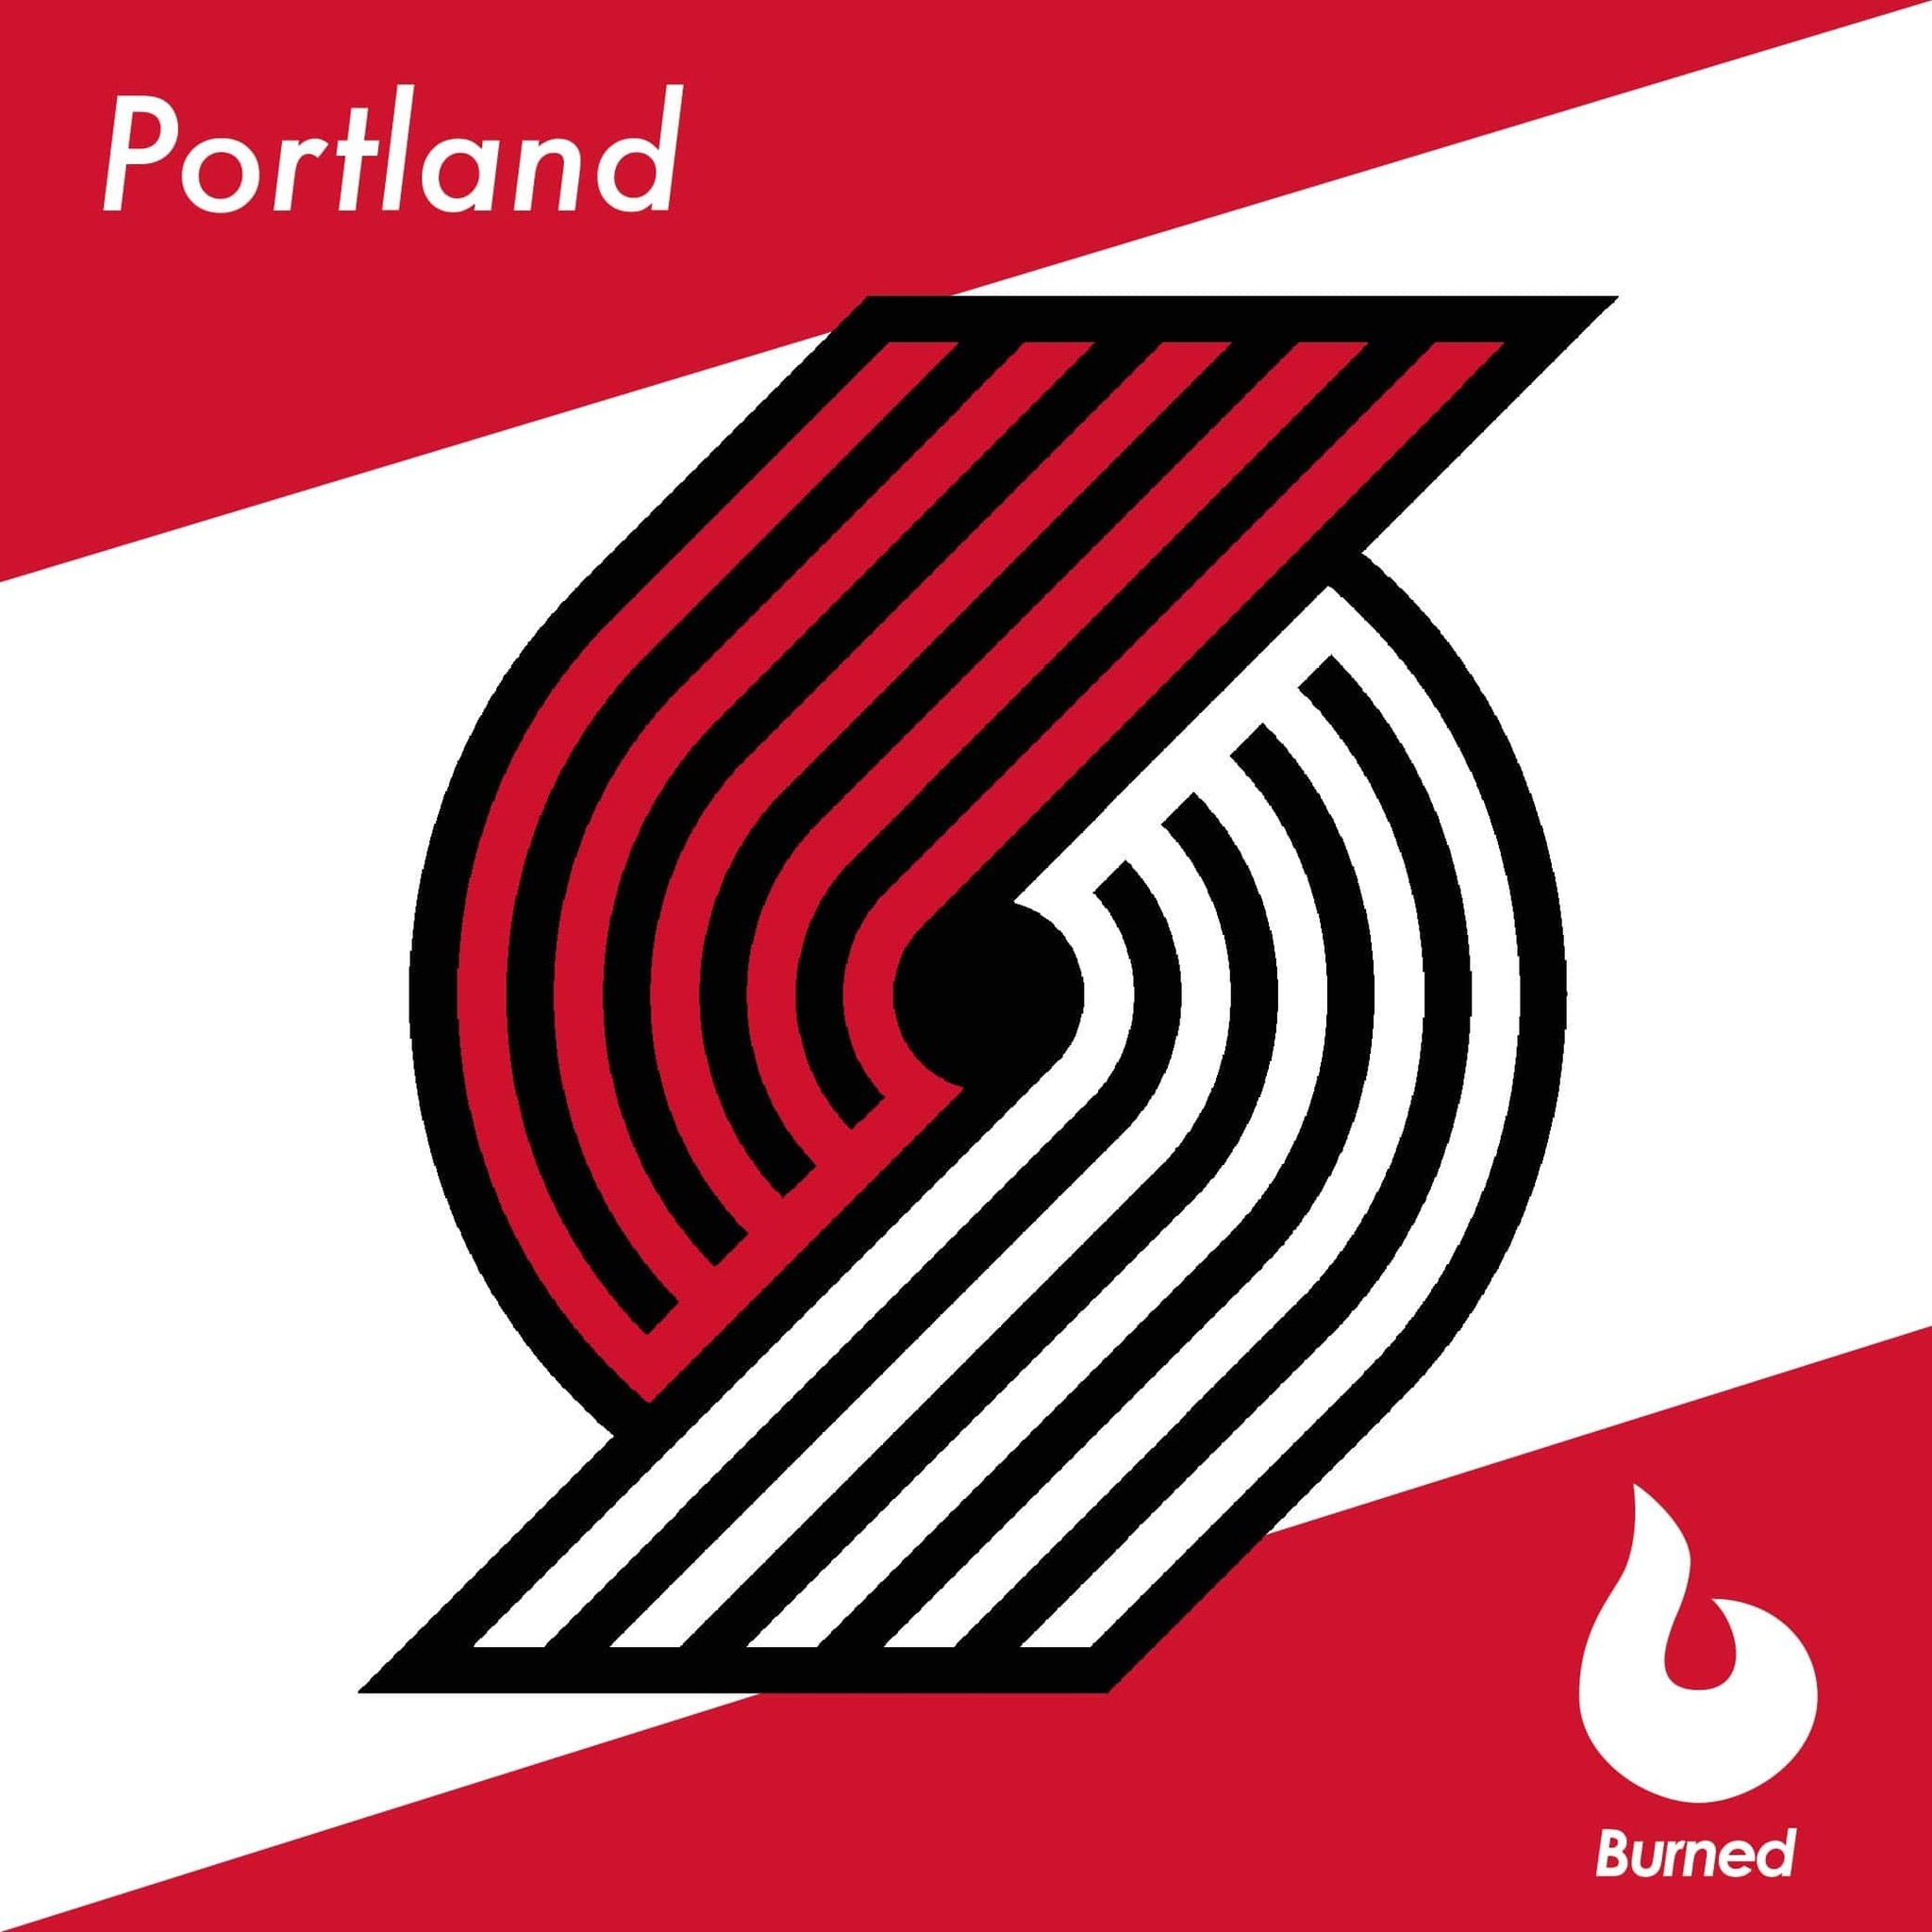 Portland Trail Blazers Franchise Awards: Clyde Drexler Is The